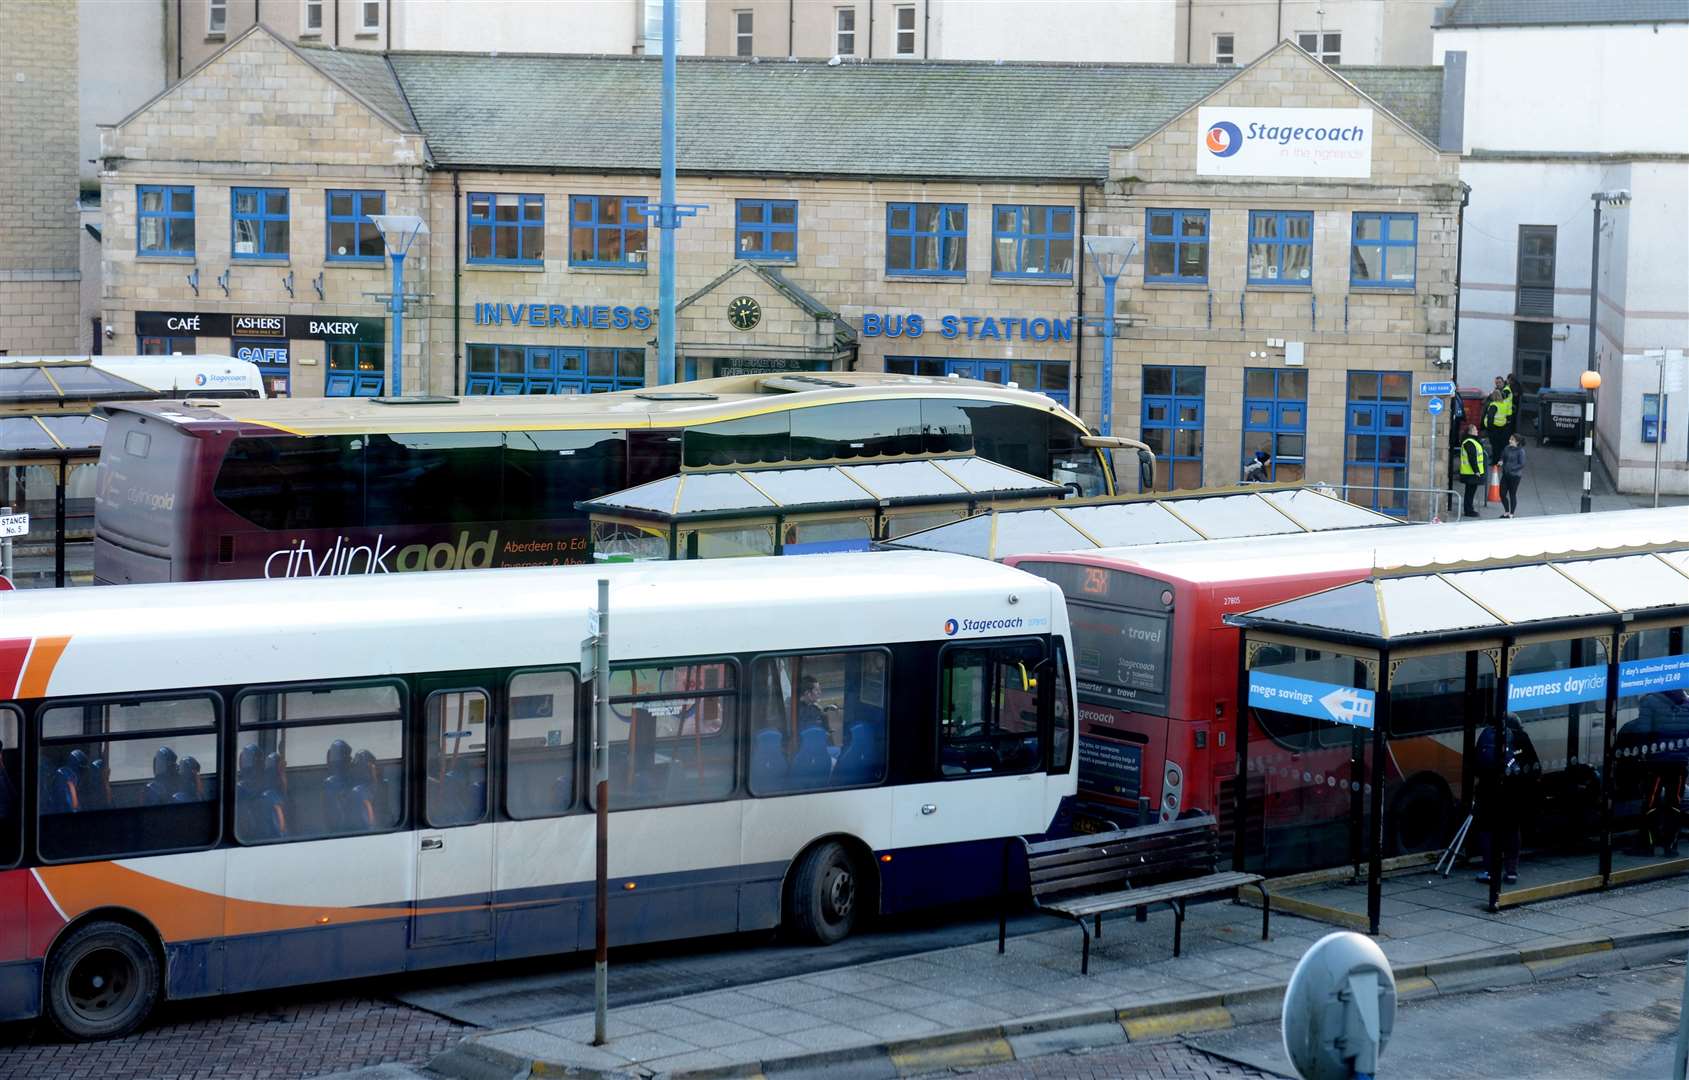 City bus services are not up to scratch says one reader.